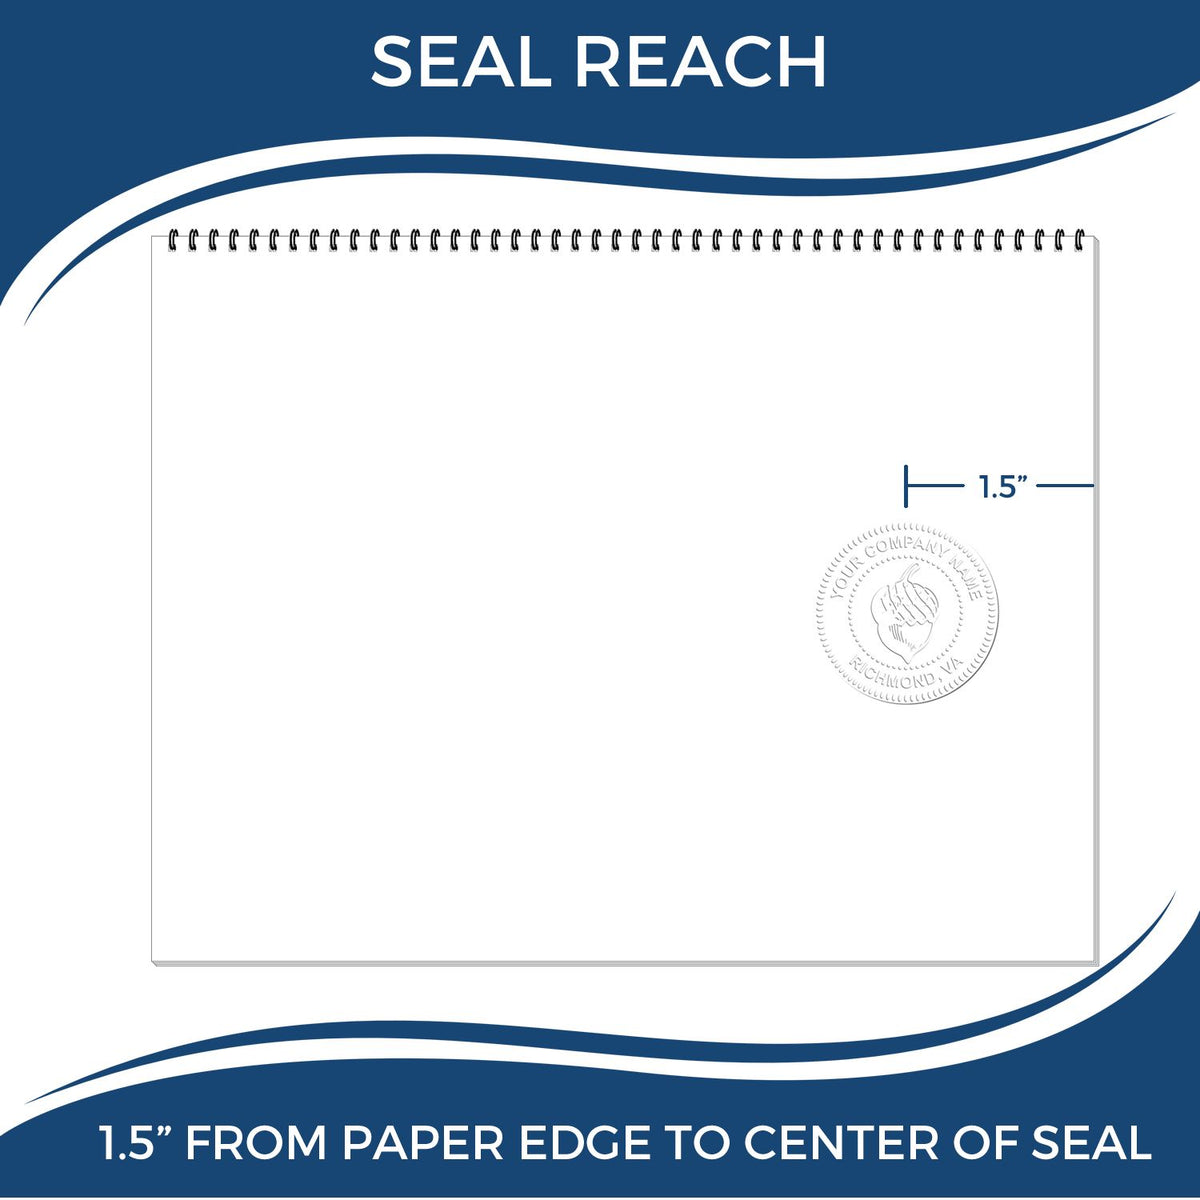 An infographic showing the seal reach which is represented by a ruler and a miniature seal image of the Soft Pocket Idaho Landscape Architect Embosser